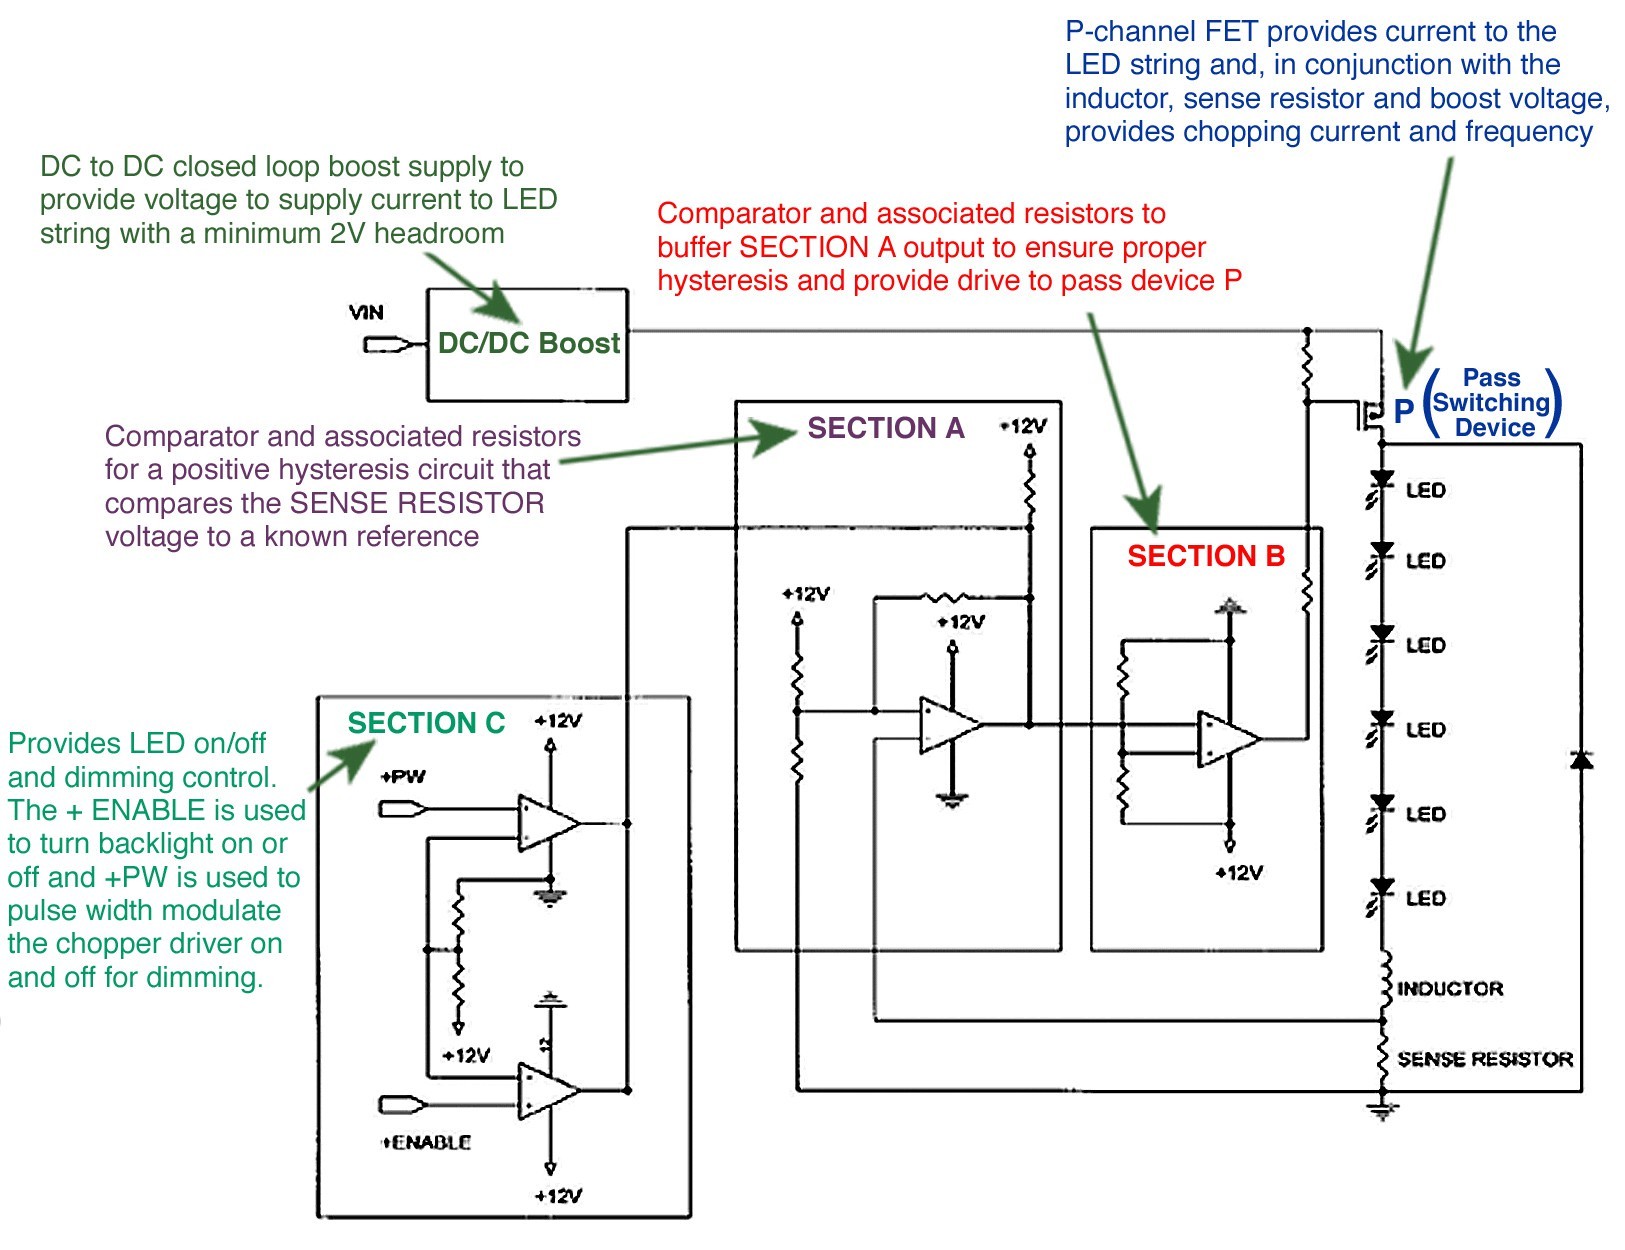 Led Driver Wiring Diagram New Led Driver Circuit Diagram Diagram Of Led Driver Wiring Diagram